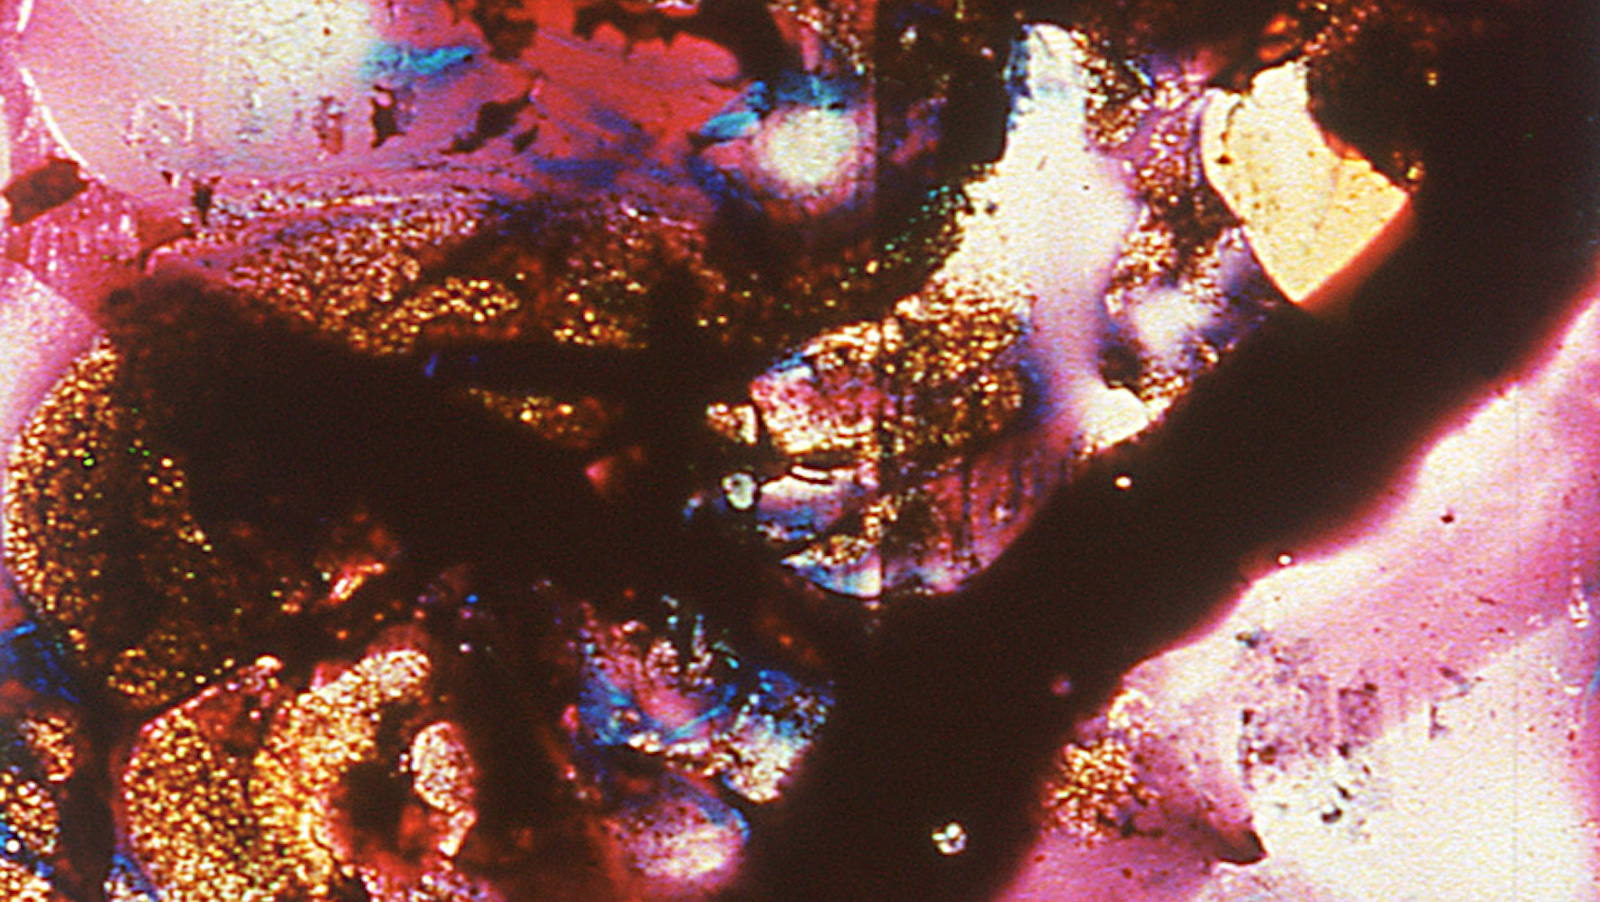 An abstract image of pink, blue, and gold paint on glass